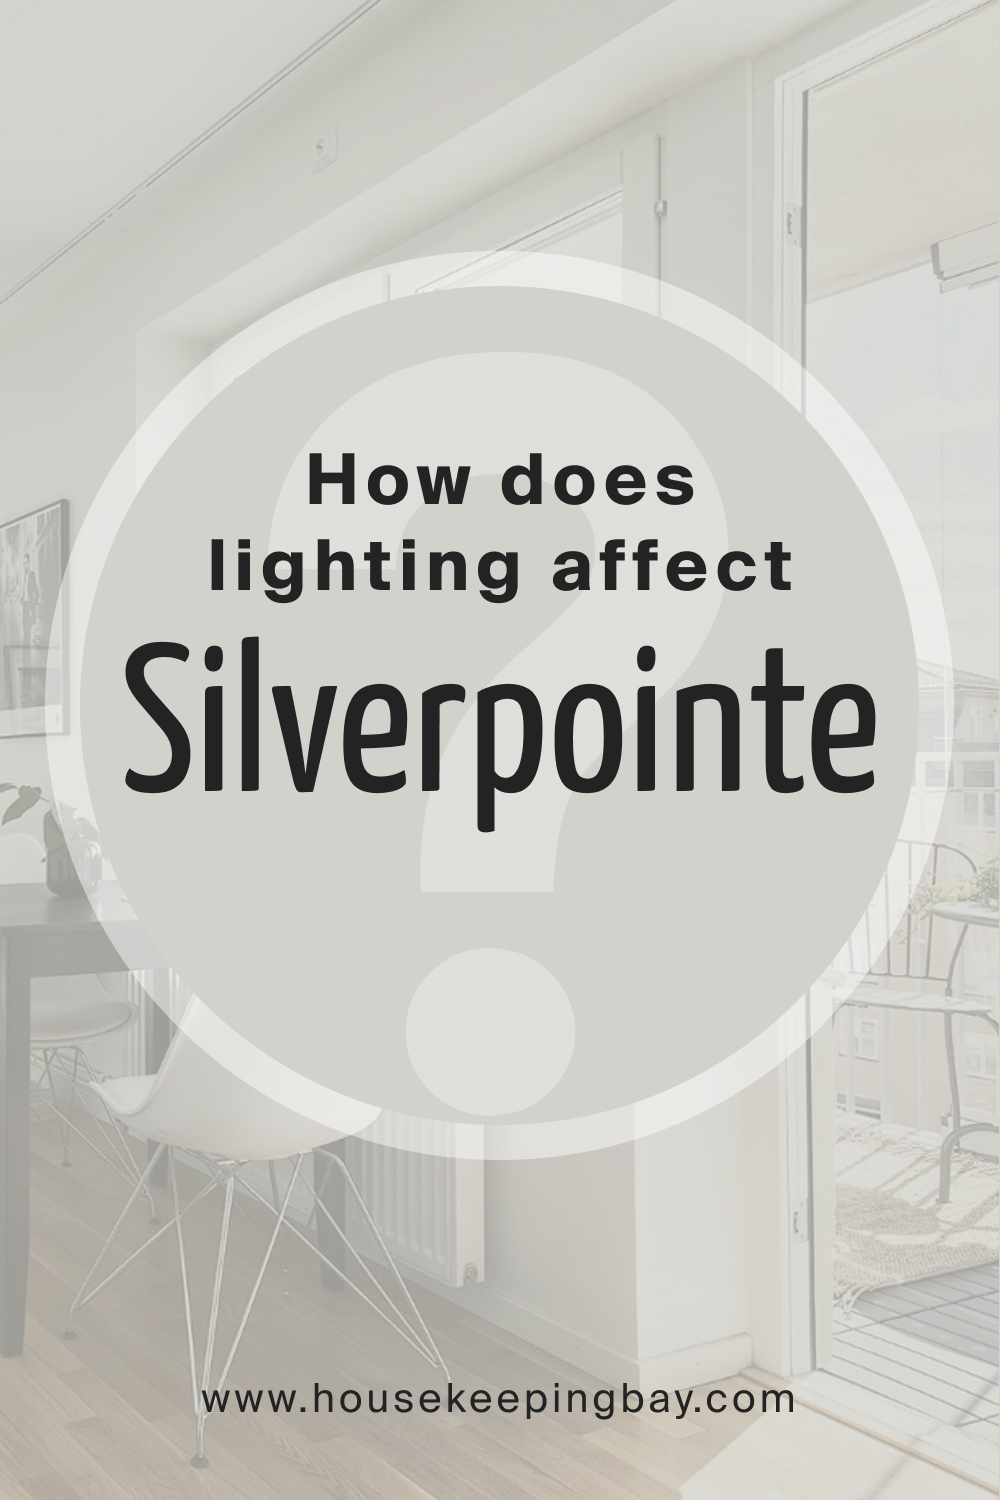 How does lighting affect SW Silverpointe